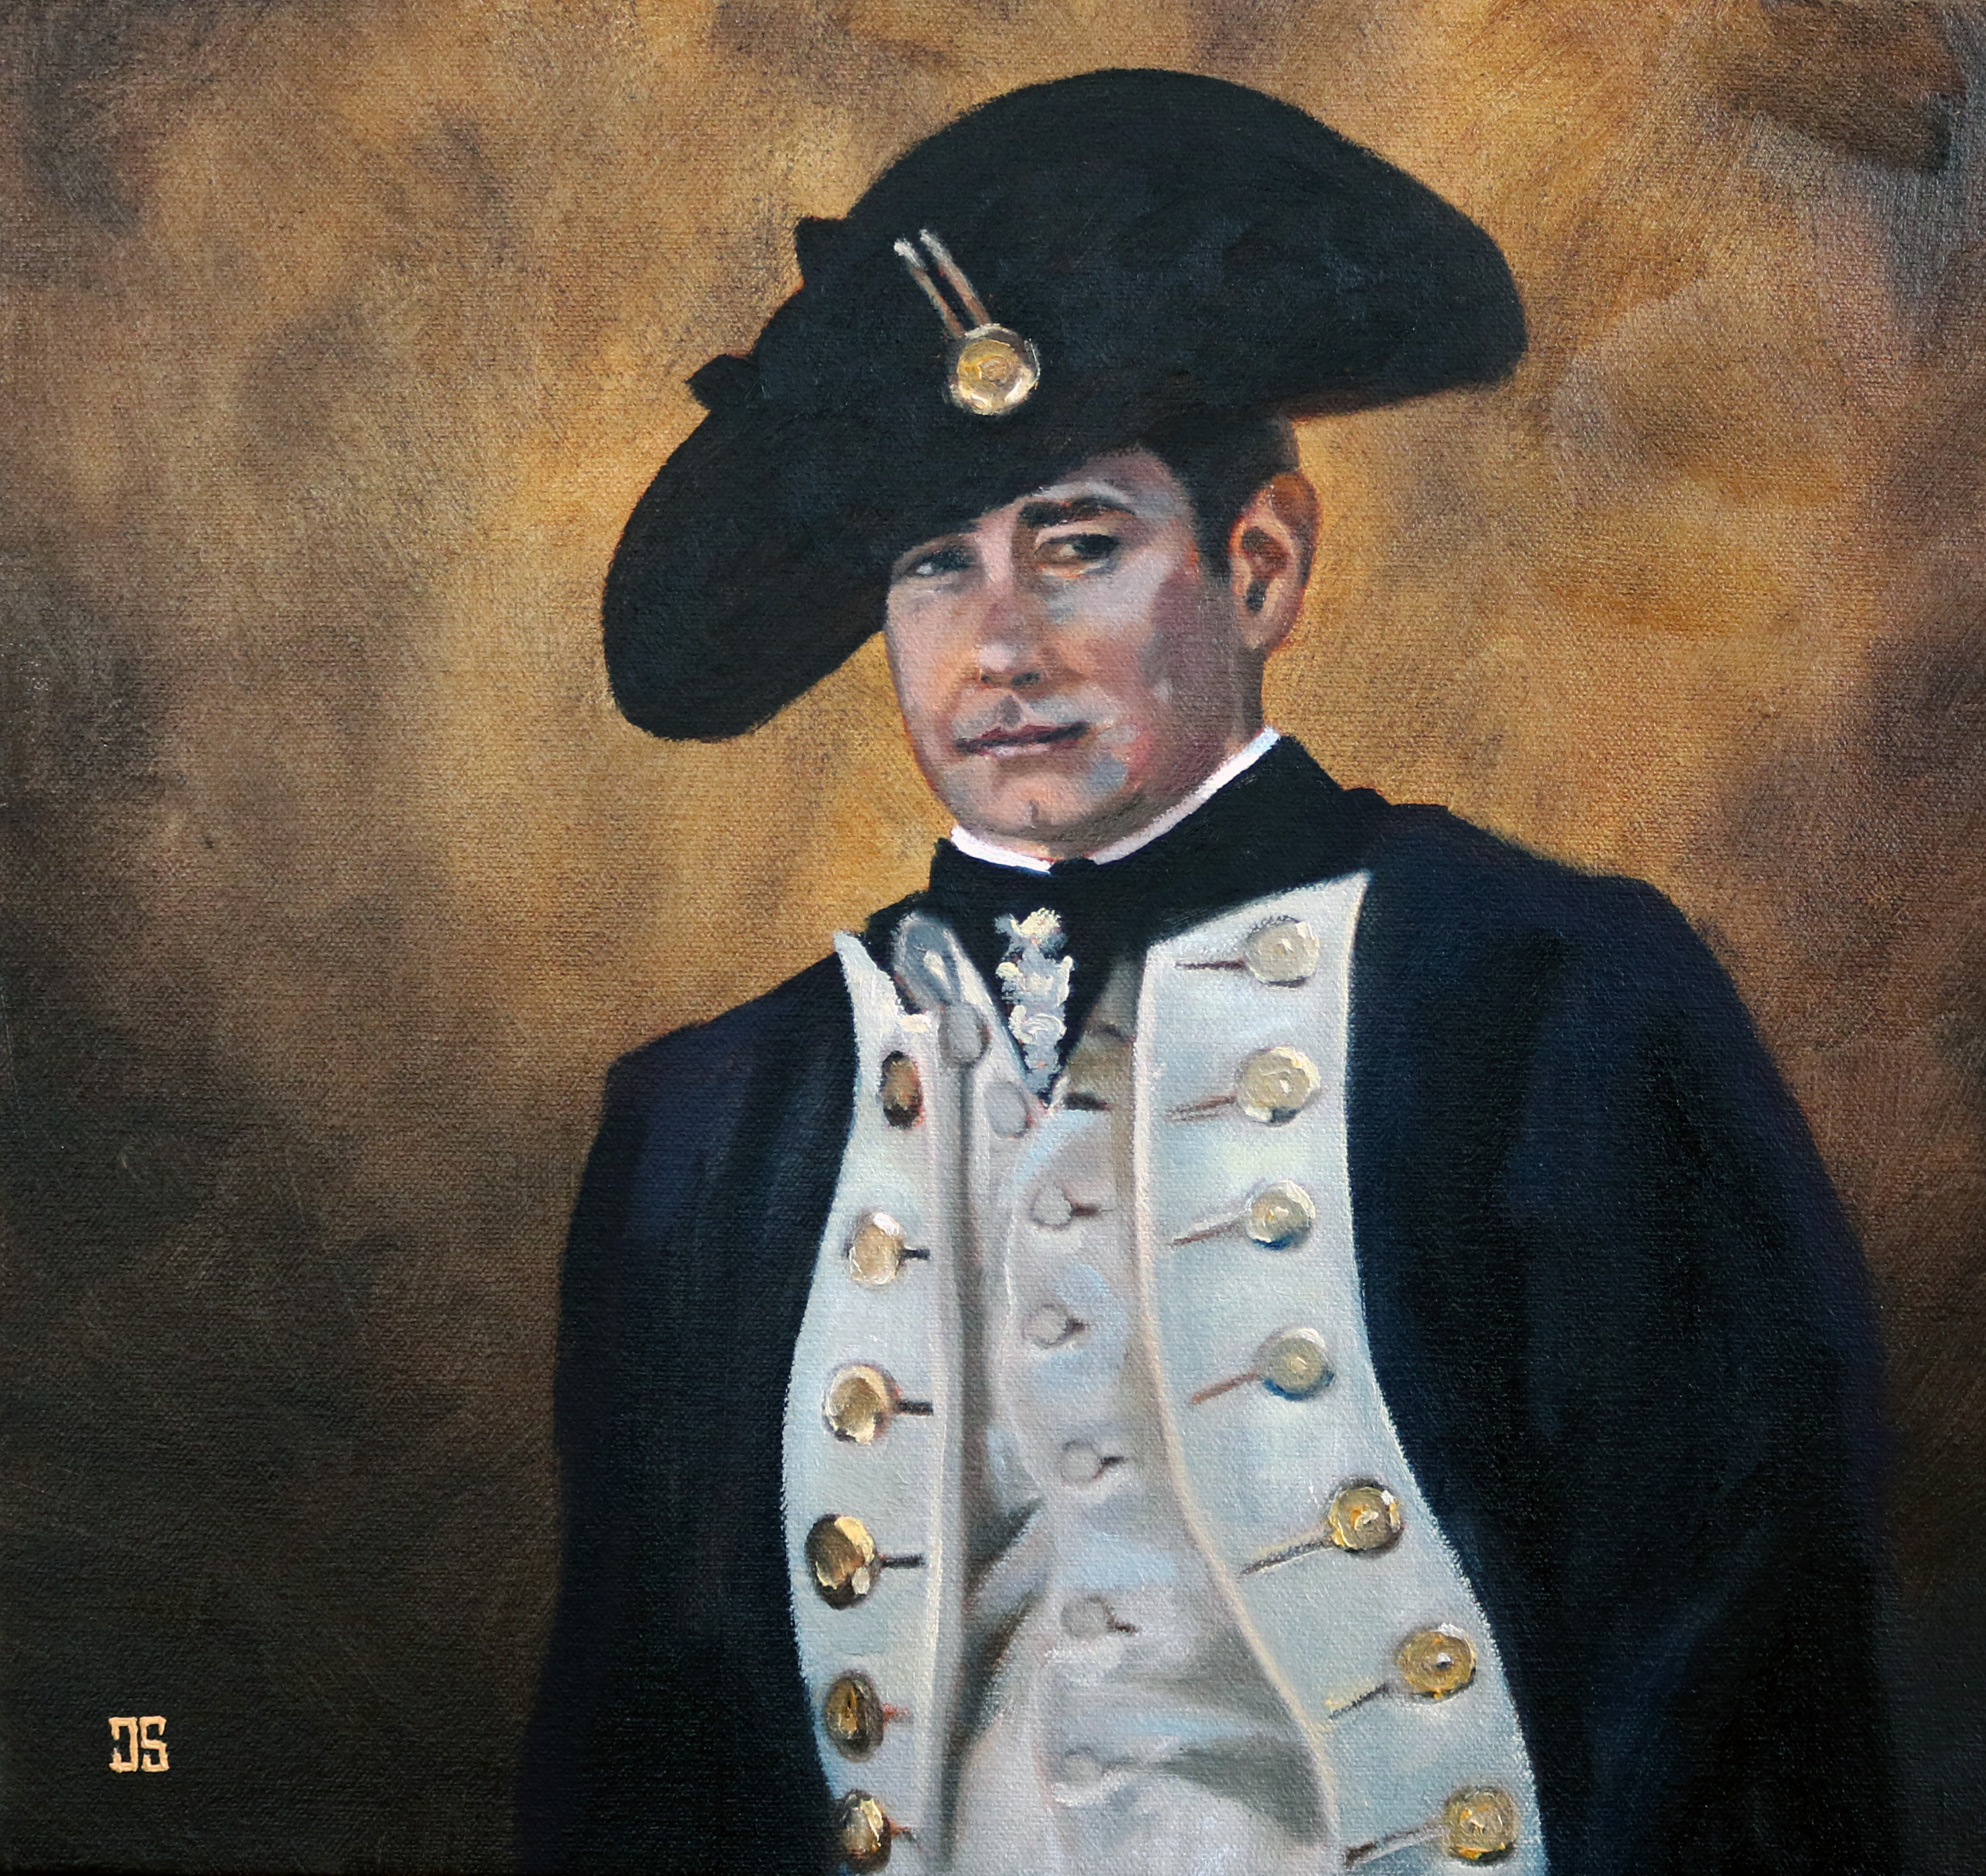 Oil painting "The Gentleman" by Jeffrey Dale Starr